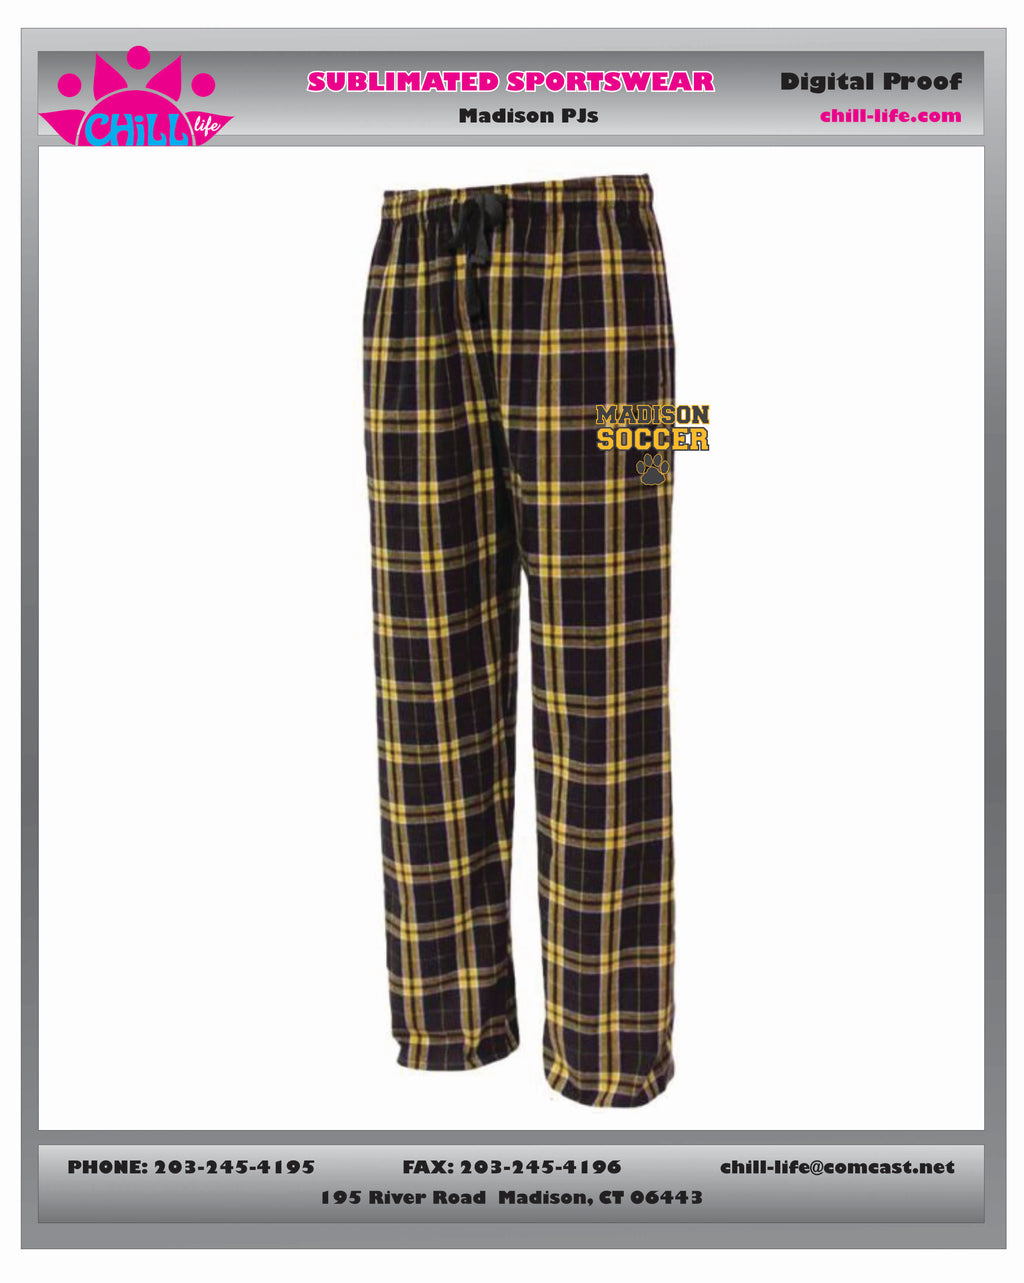 MADISON YOUTH SOCCER FLANNEL PJS